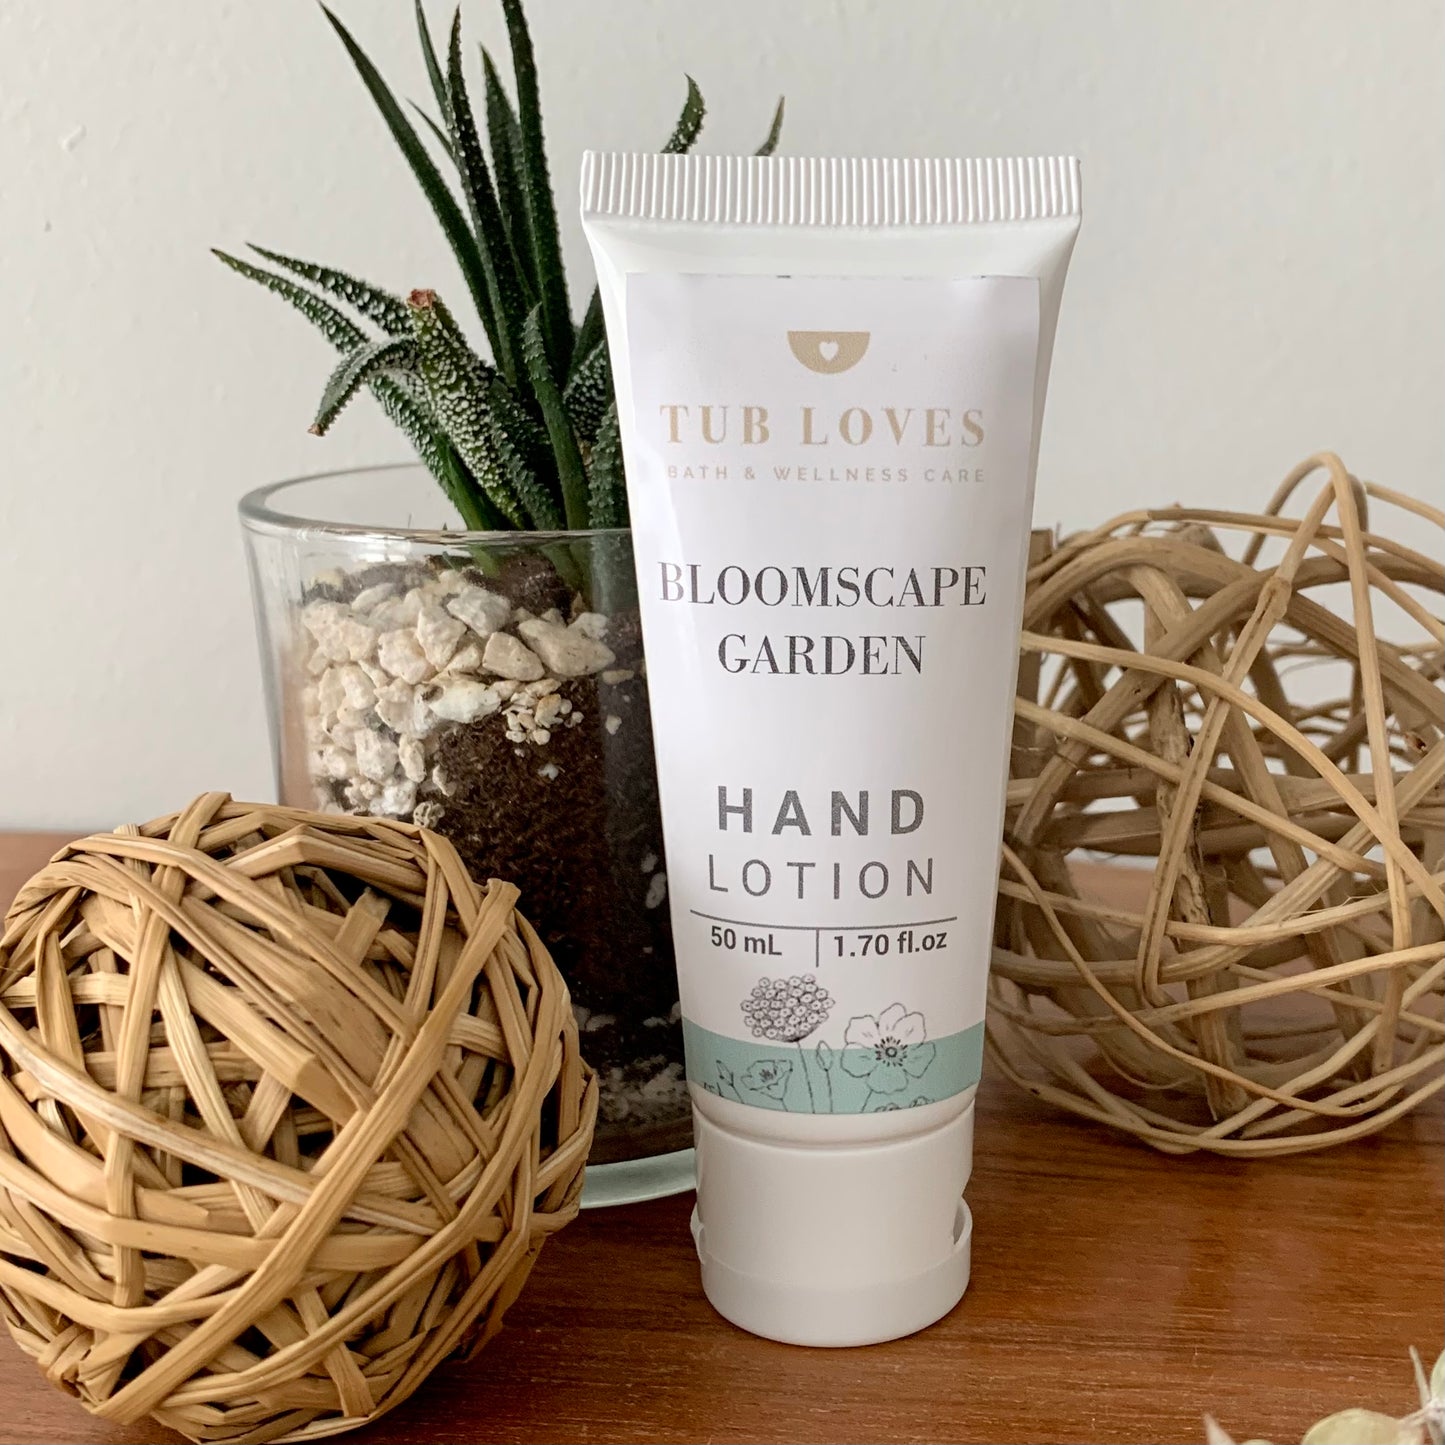 Bloomscape Garden - Hand Lotion